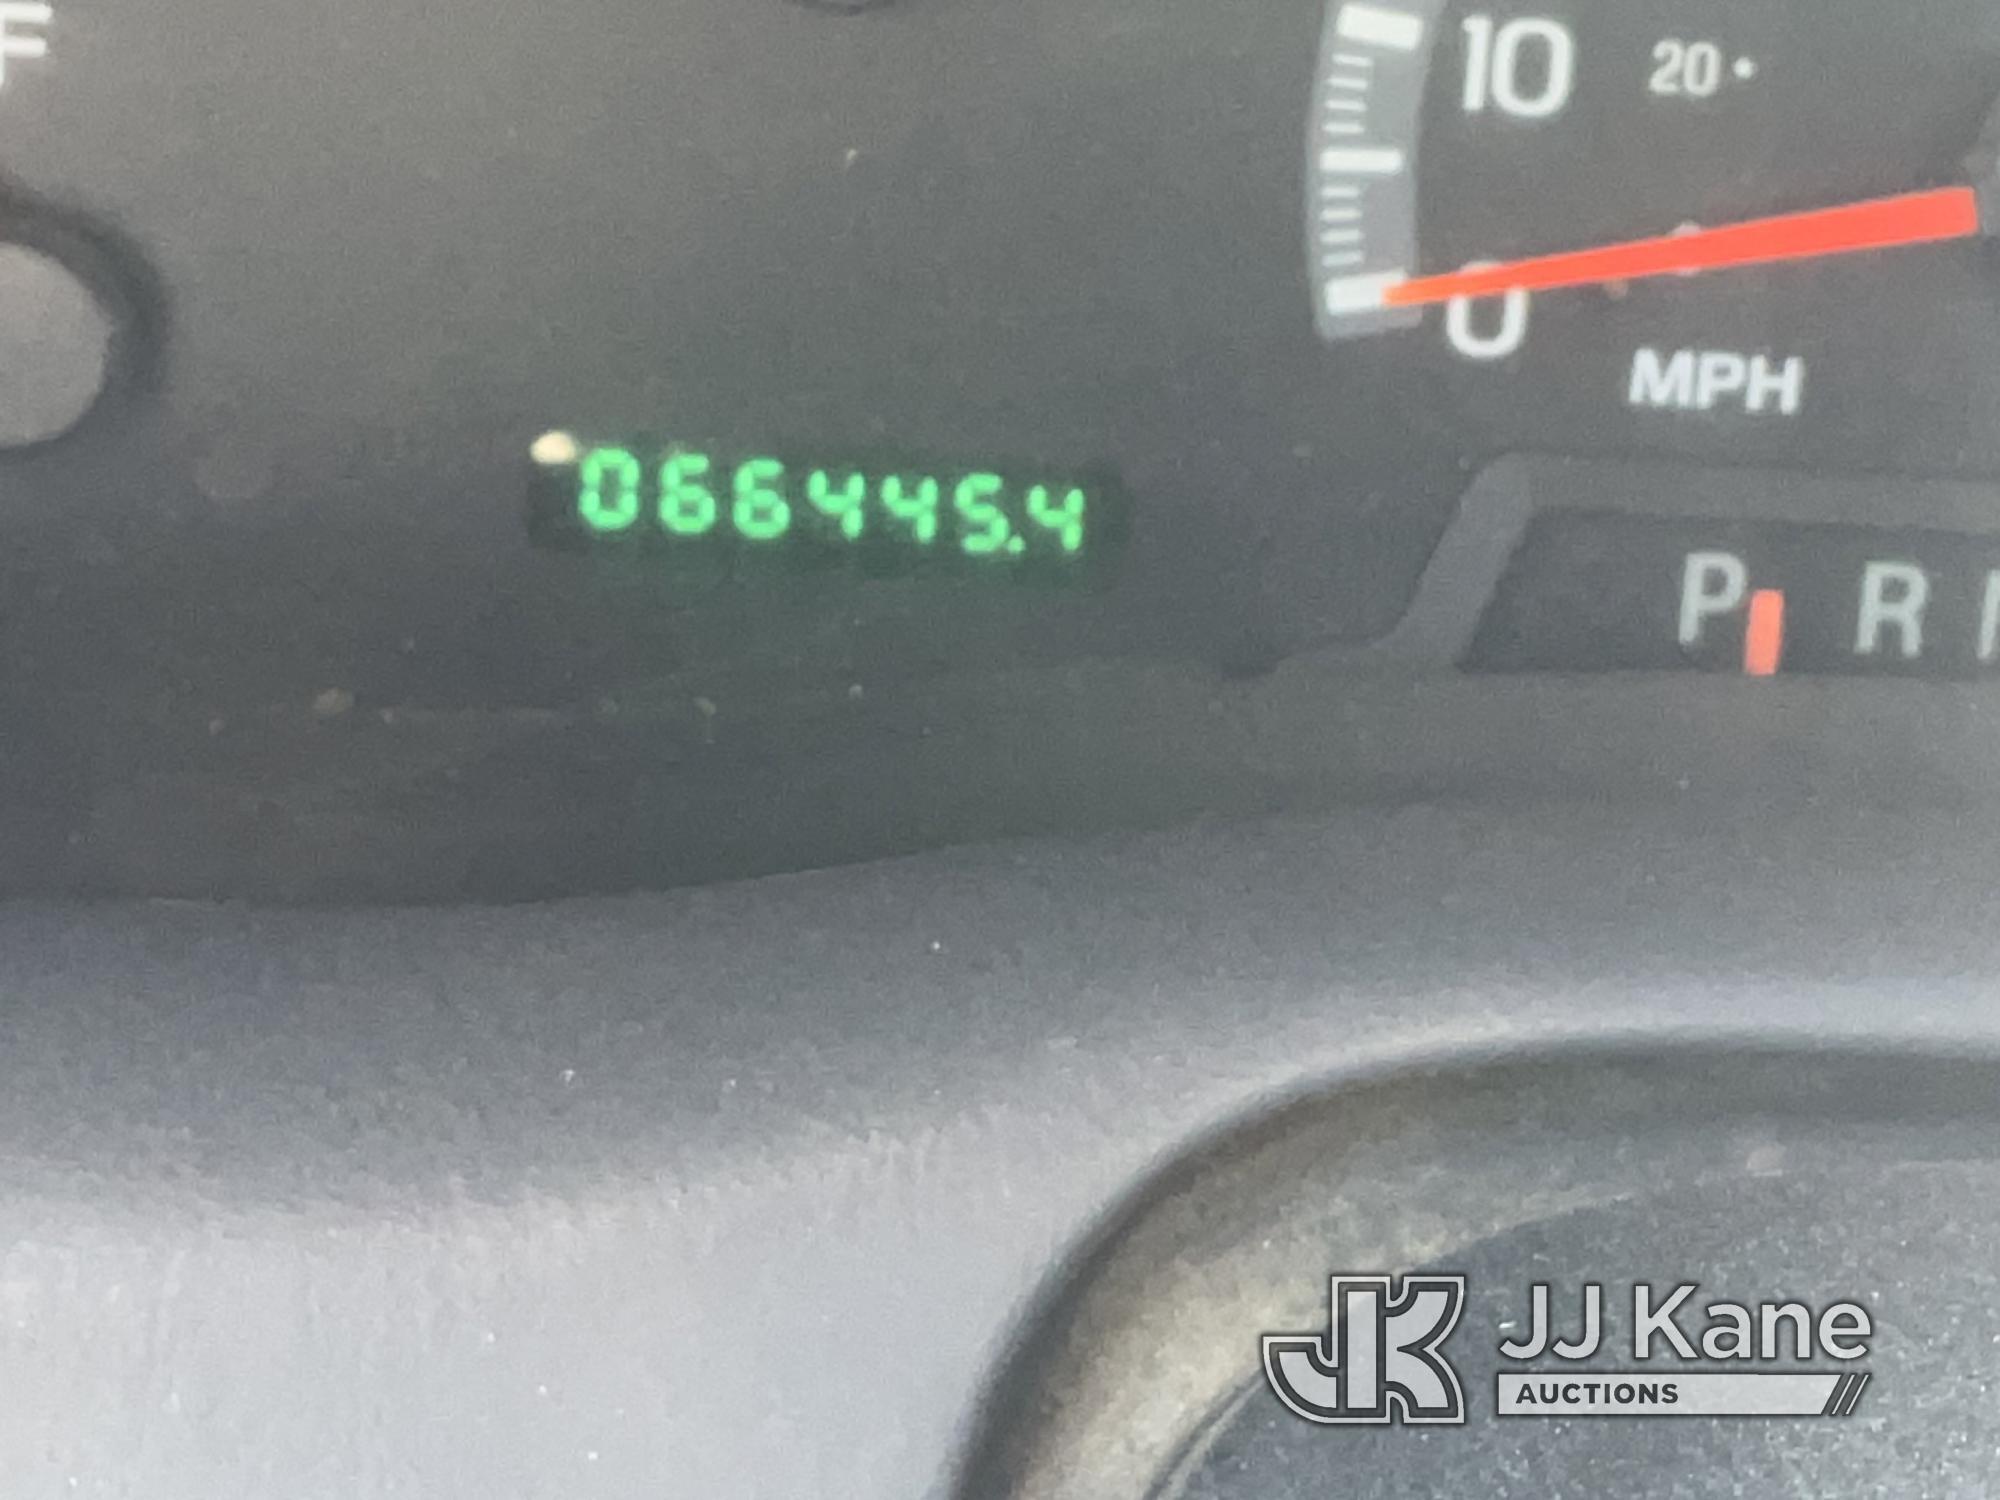 (Dixon, CA) 2004 Ford F150 Pickup Truck Runs & Moves, Vehicle Leaks Oil, Conditions Unknown